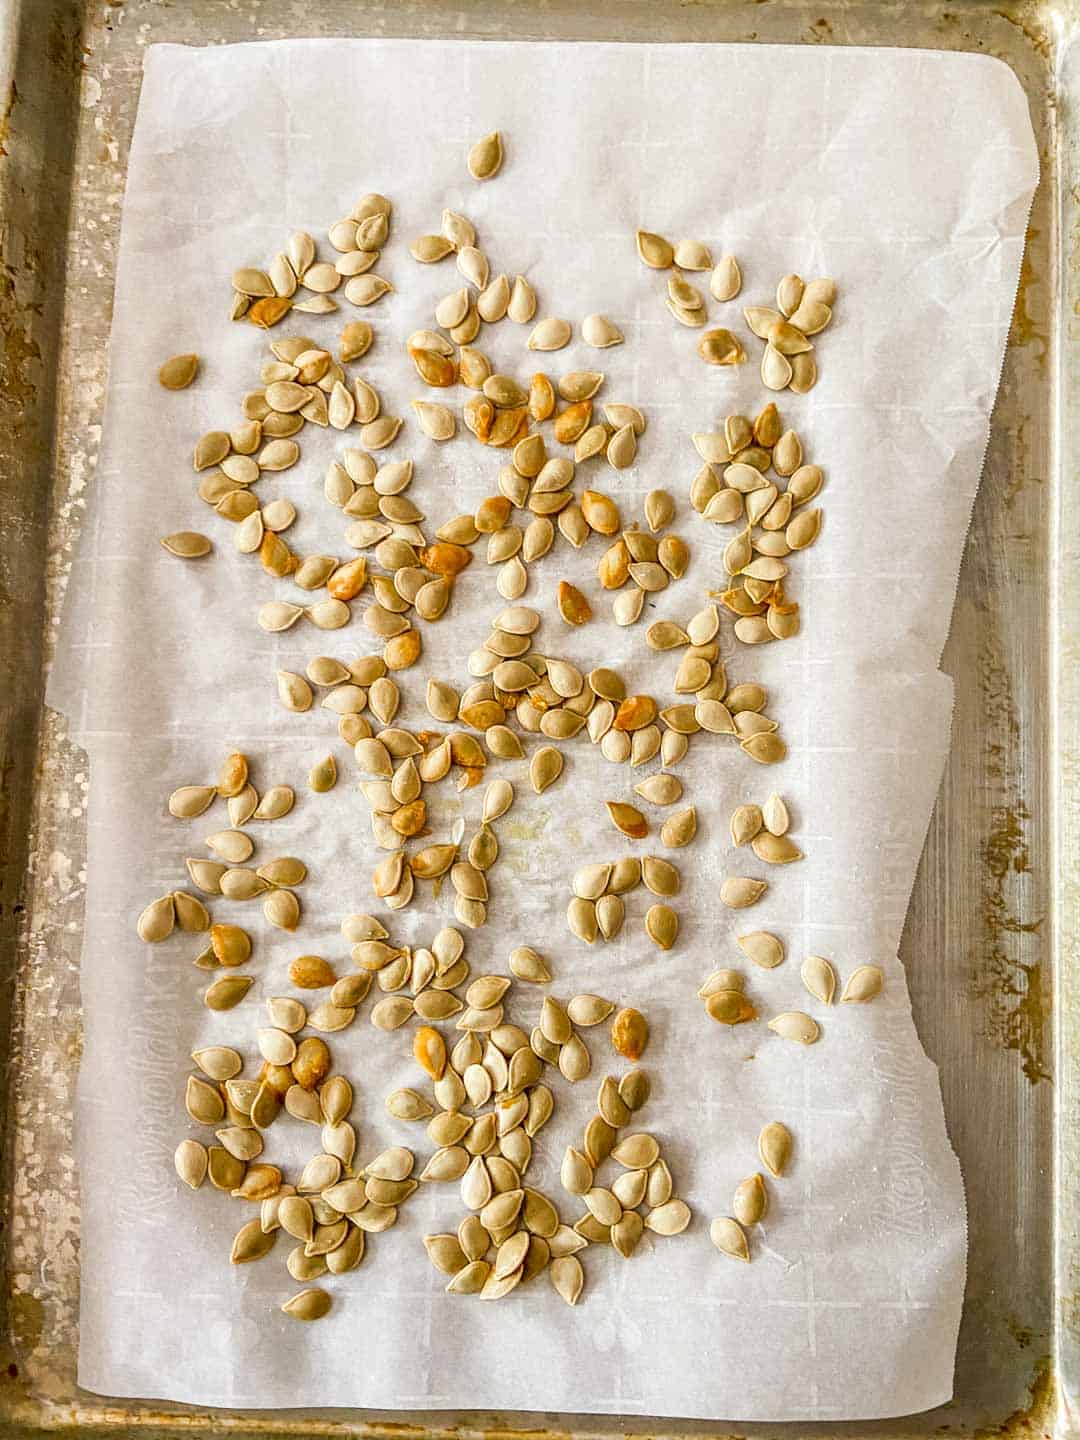 Squash seeds on a parchment lined baking sheet.